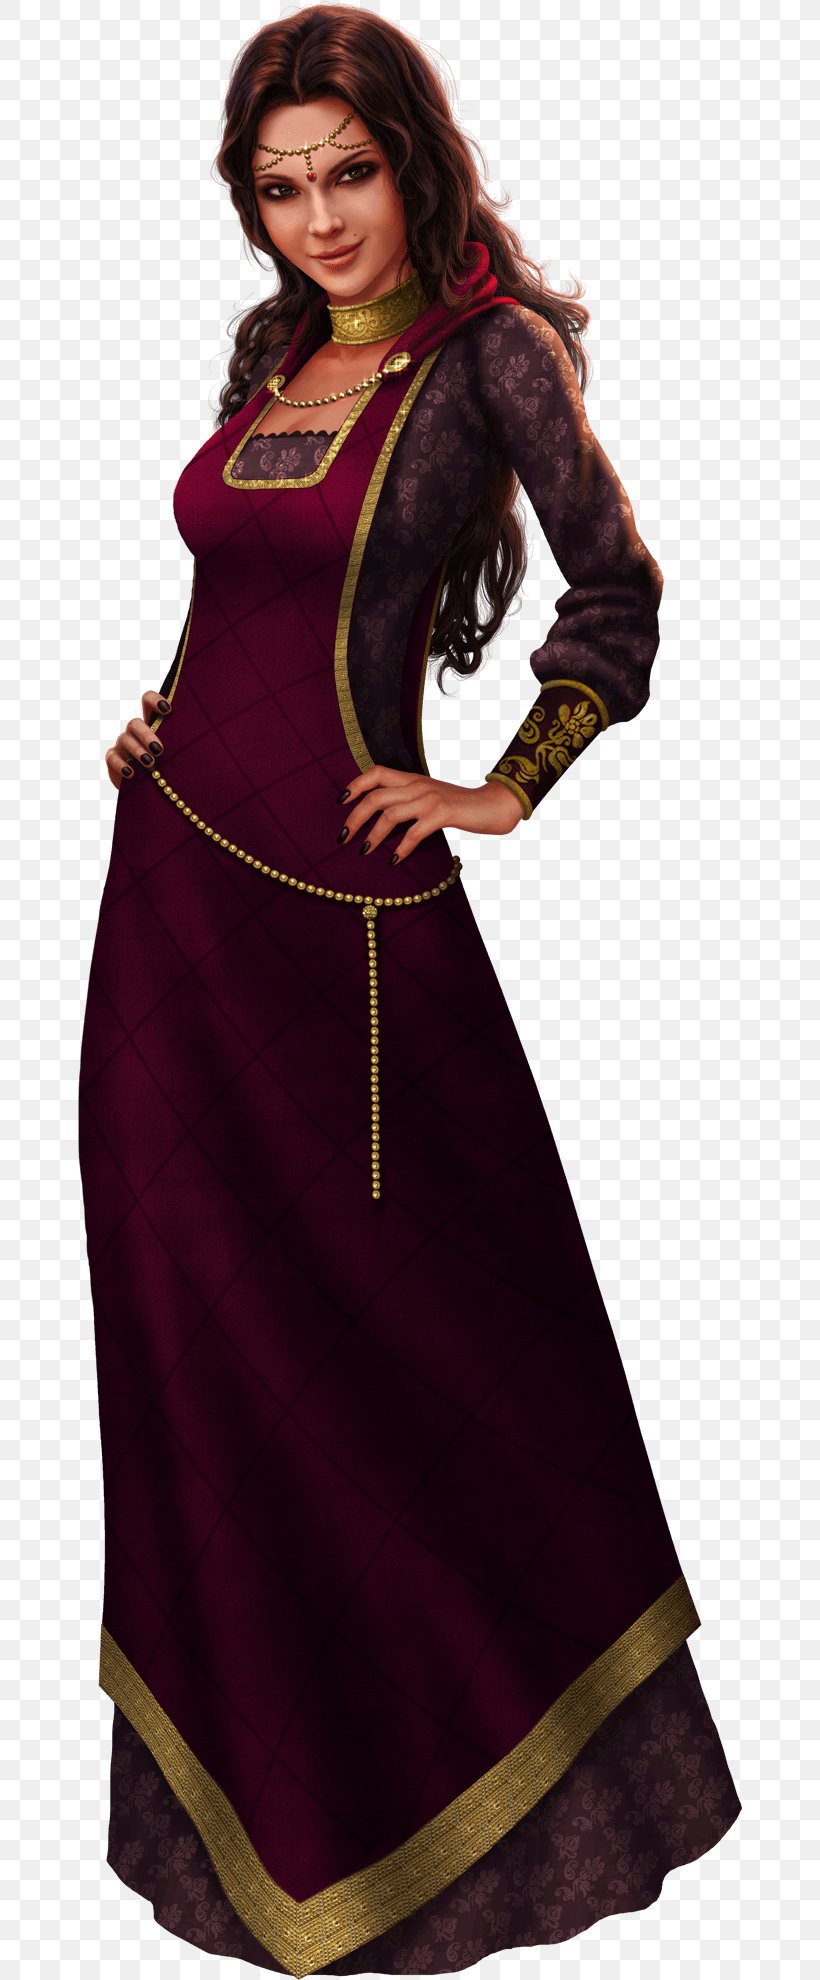 The Sims Medieval: Pirates And Nobles The Sims 3: Ambitions The Sims 2 The Sims 3: World Adventures The Sims 3: Seasons, PNG, 664x1980px, Sims Medieval Pirates And Nobles, Costume, Costume Design, Electronic Arts, Magenta Download Free